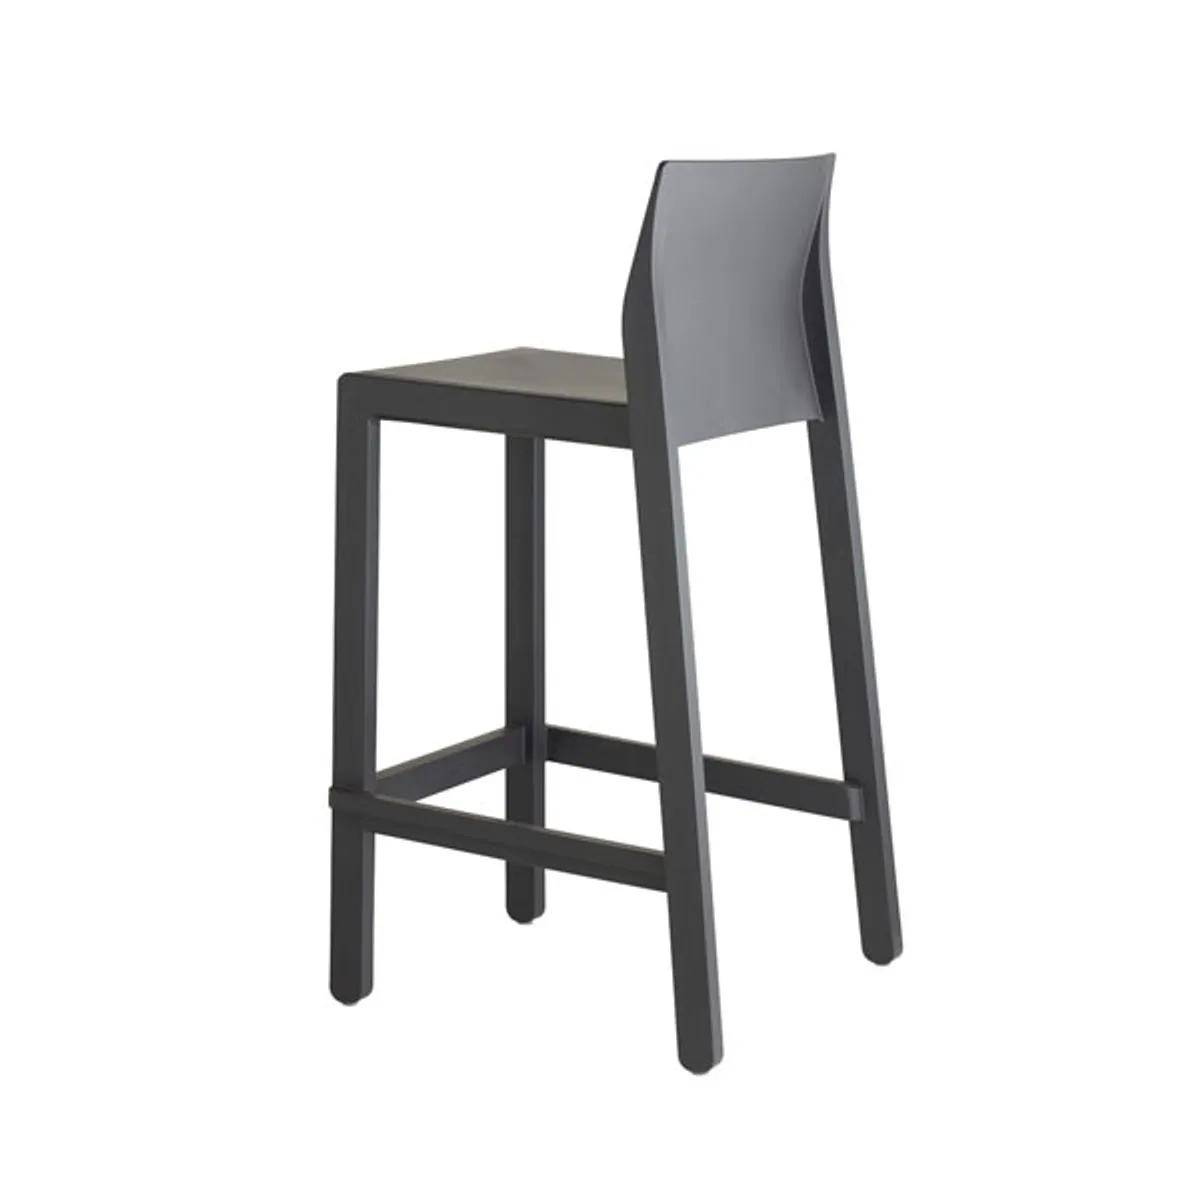 Remi bar stool bar height 8 Inside Out Contracts